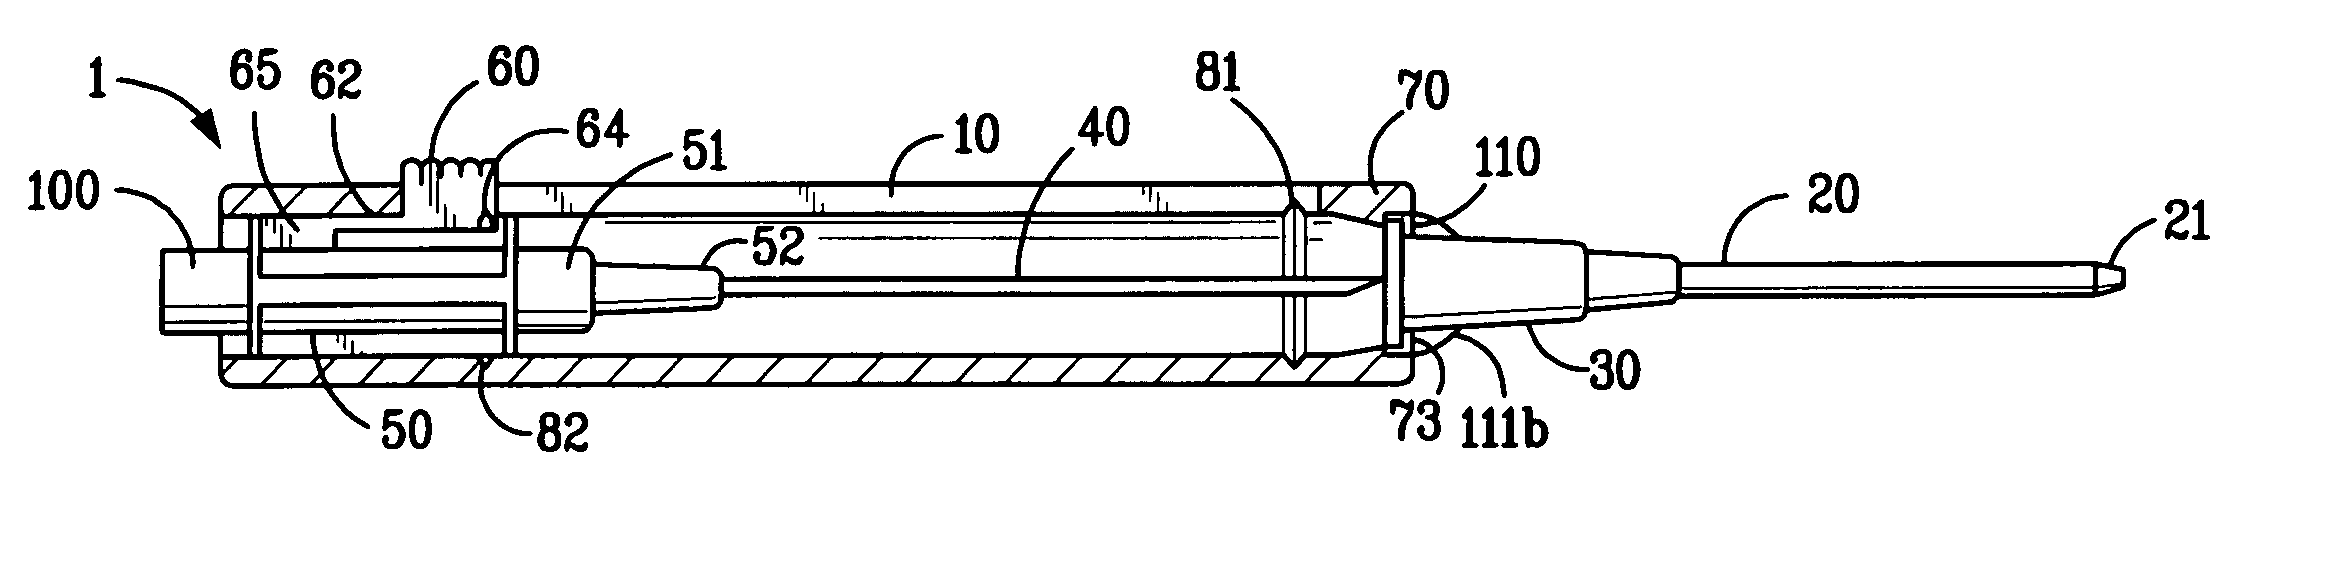 Intravenous catheter and insertion device